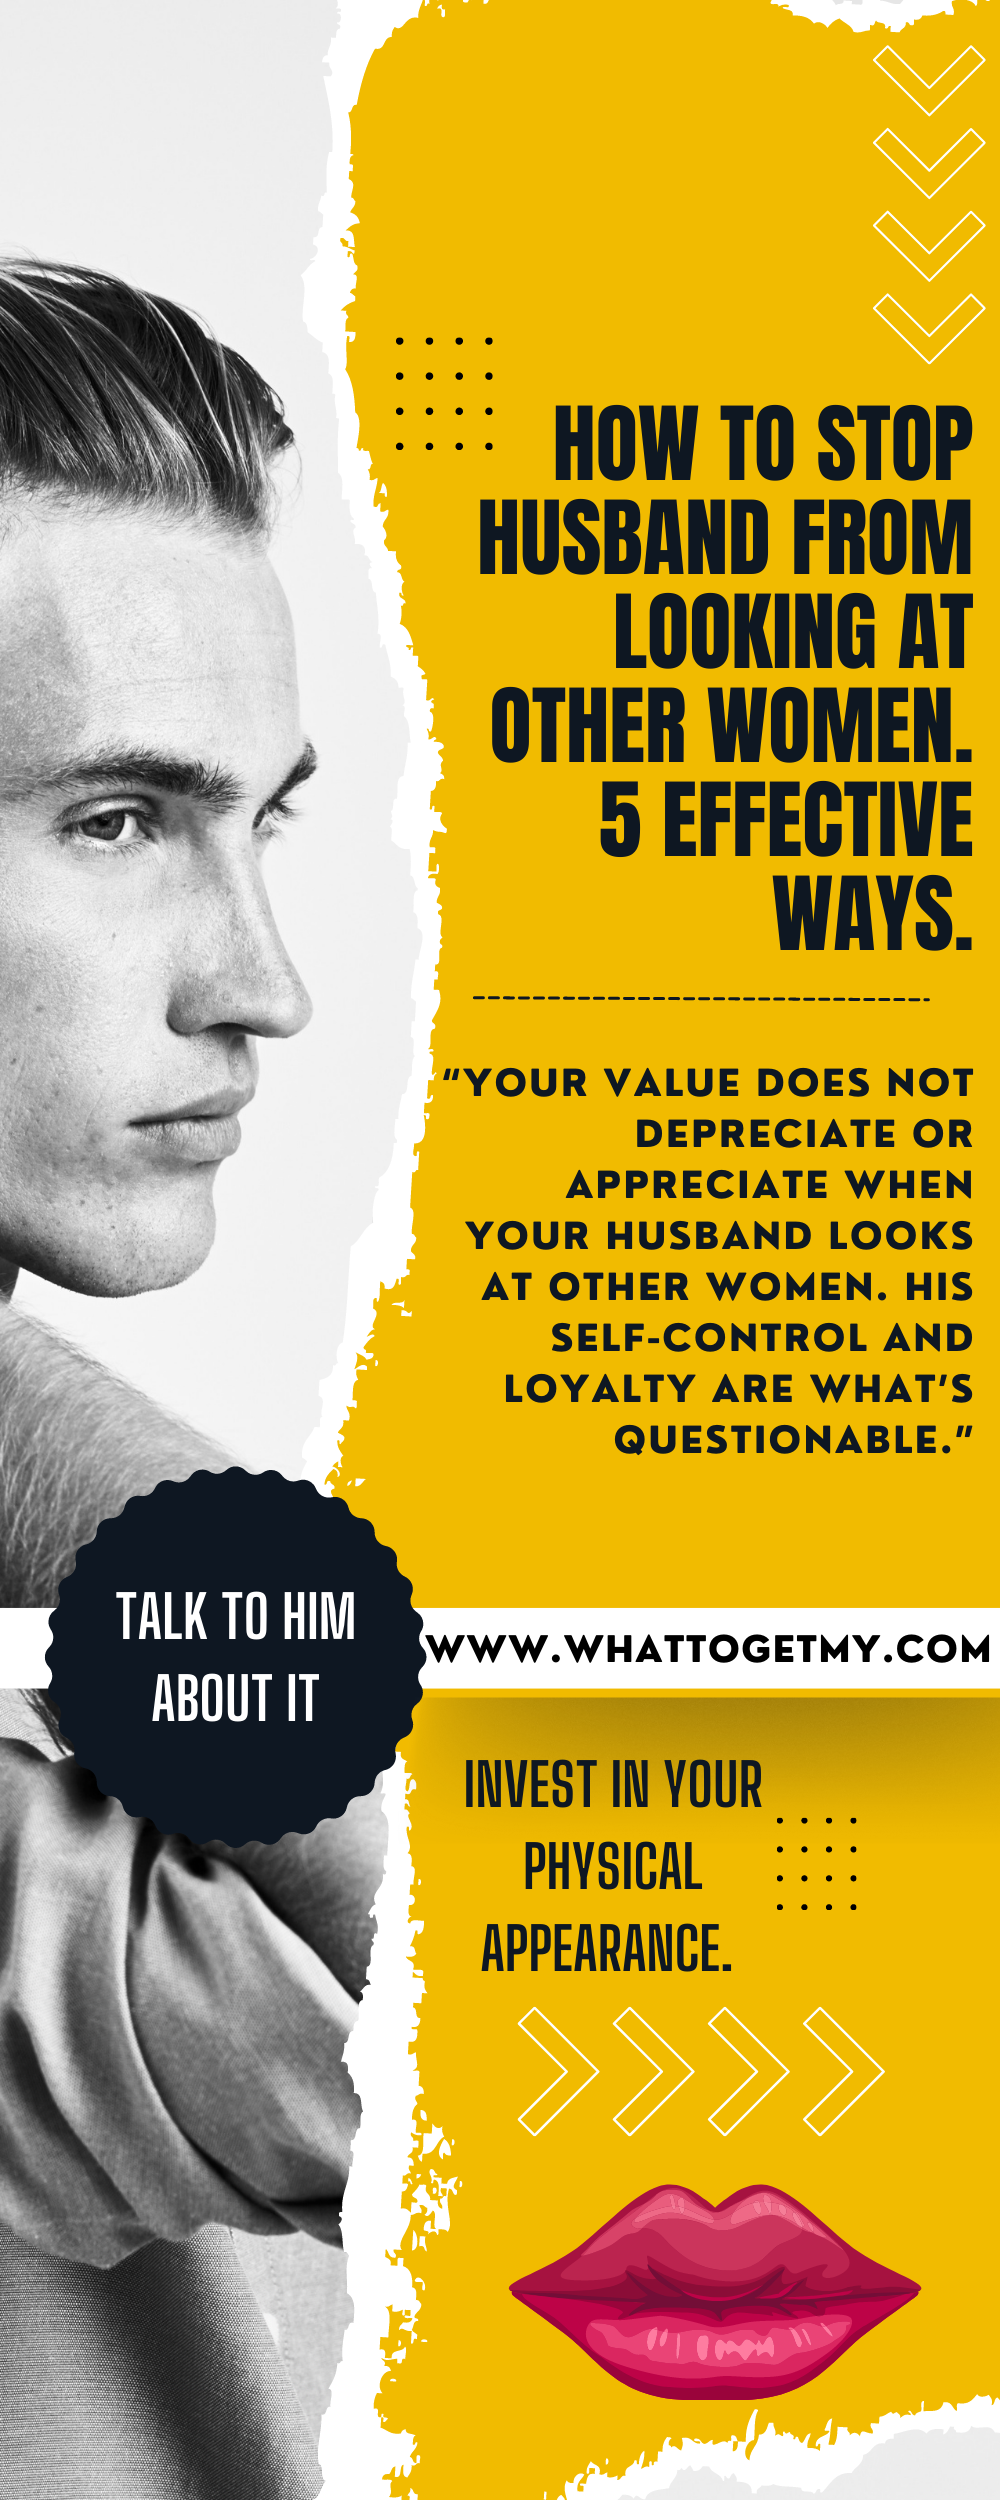 How to stop husband from looking at other women. 5 effective ways.